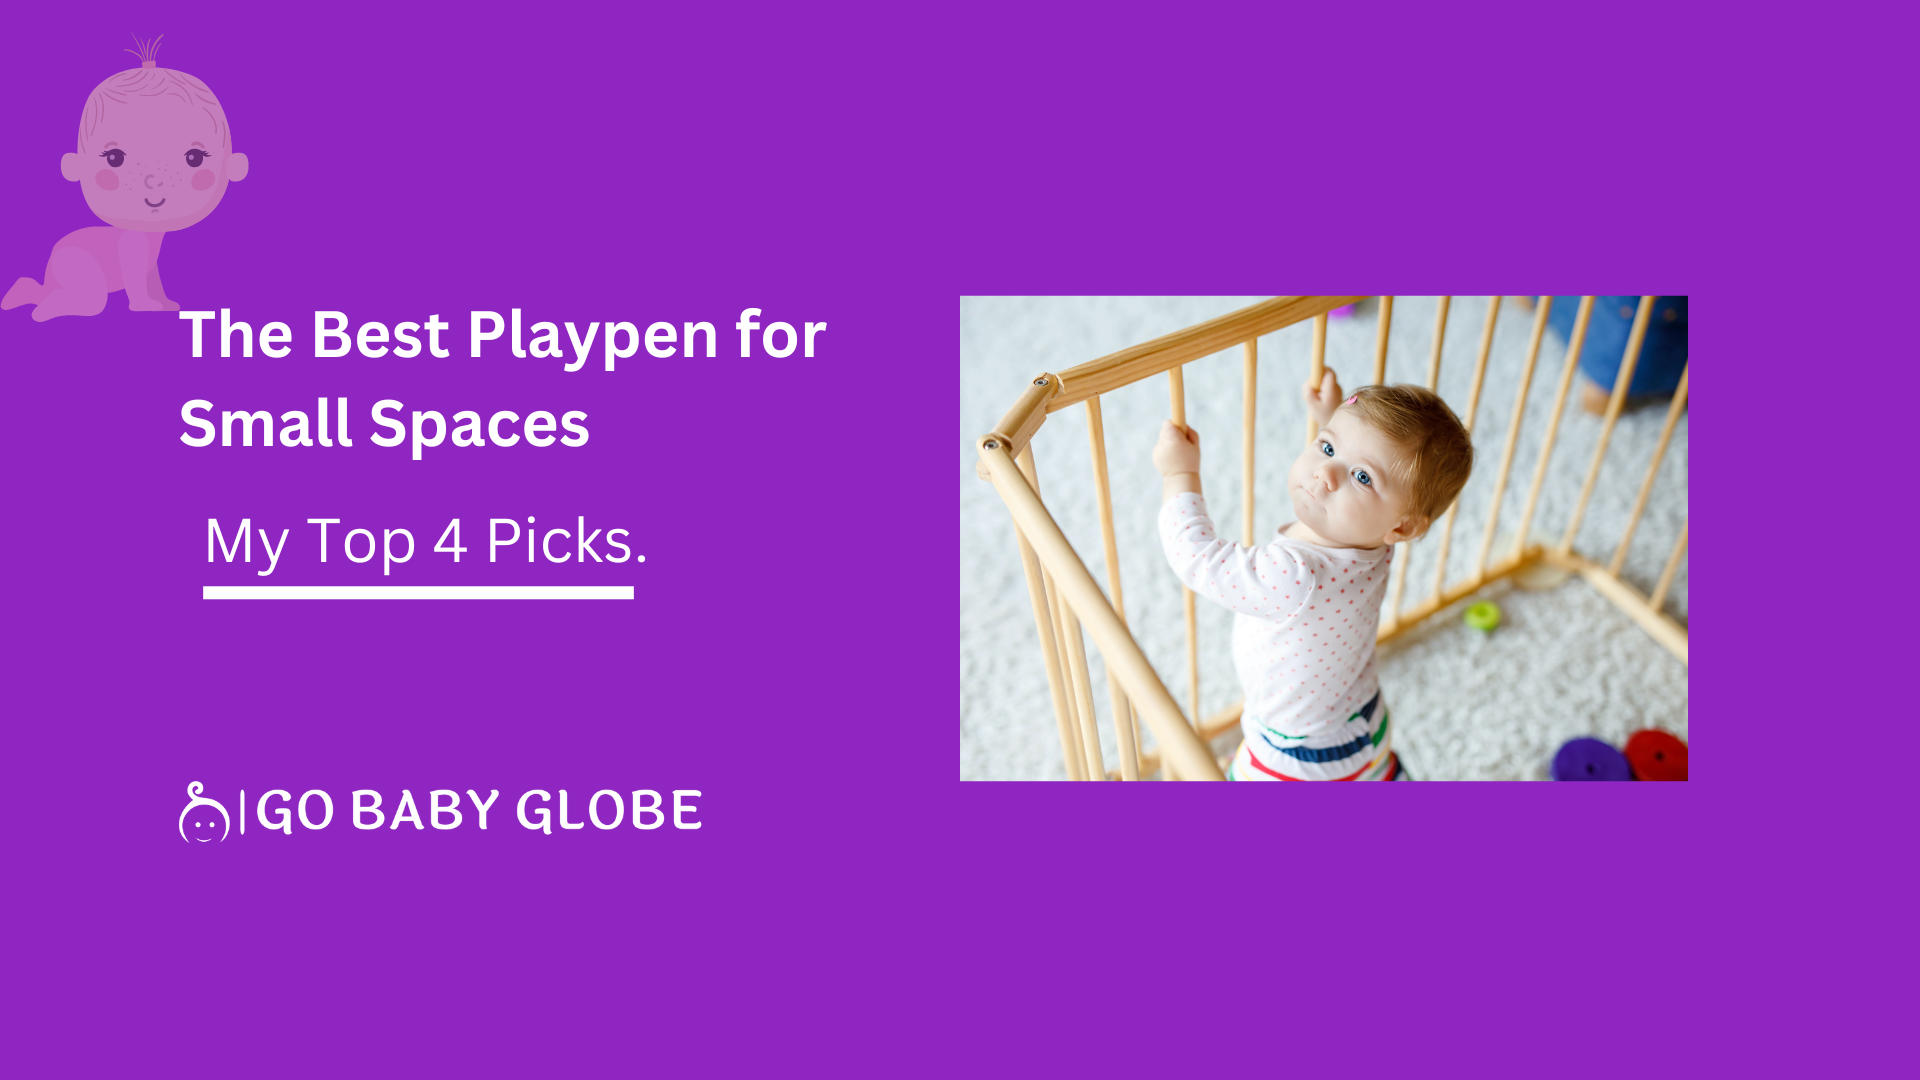 The Best Playpen for Small Spaces - Keeping Your Little One Safe and Happy